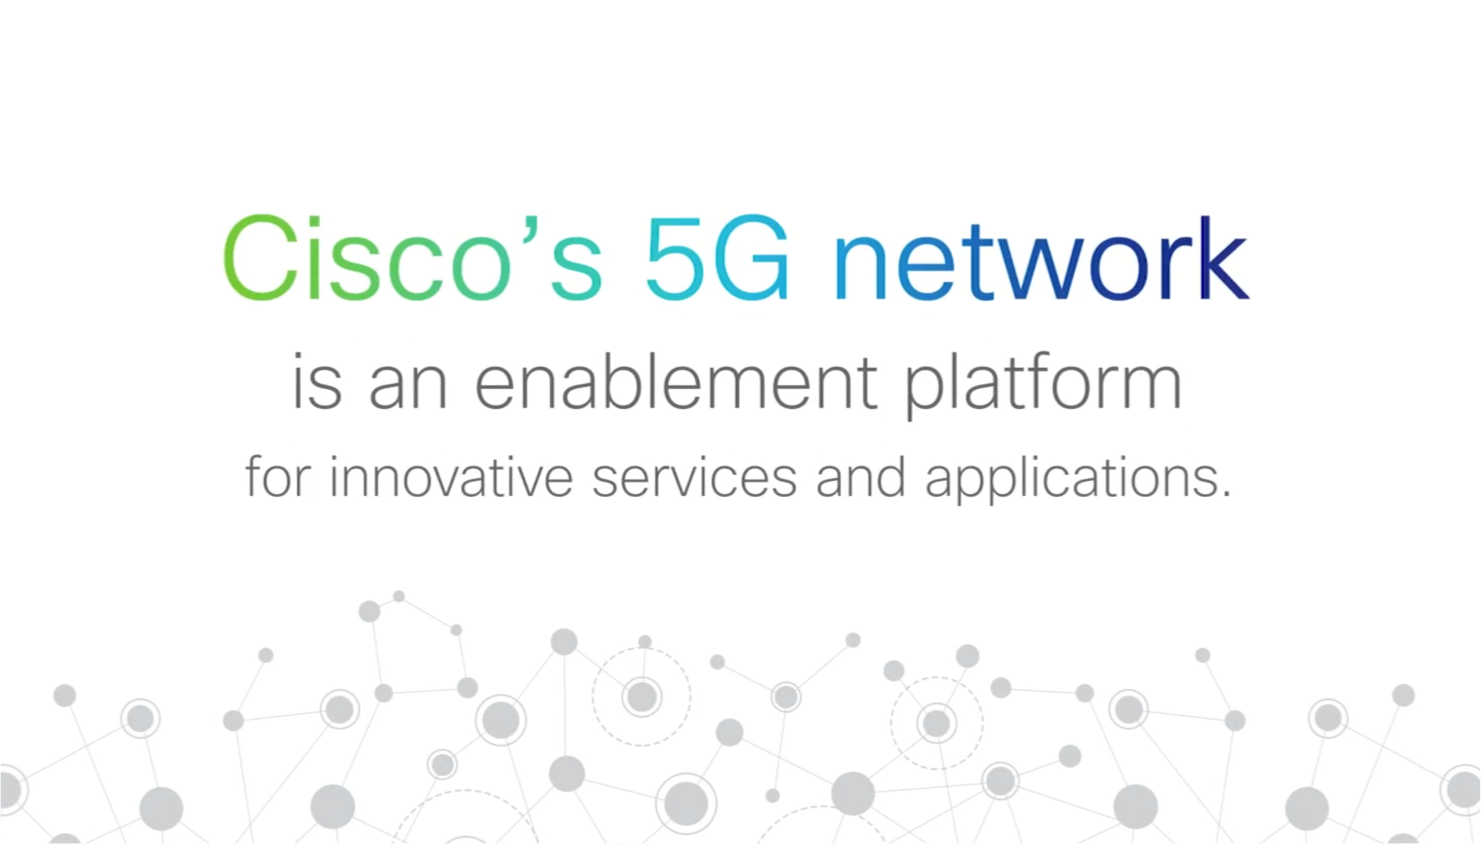 Cisco@MWC: New Capabilities, Services & Customers, Setting the Foundation for 5G